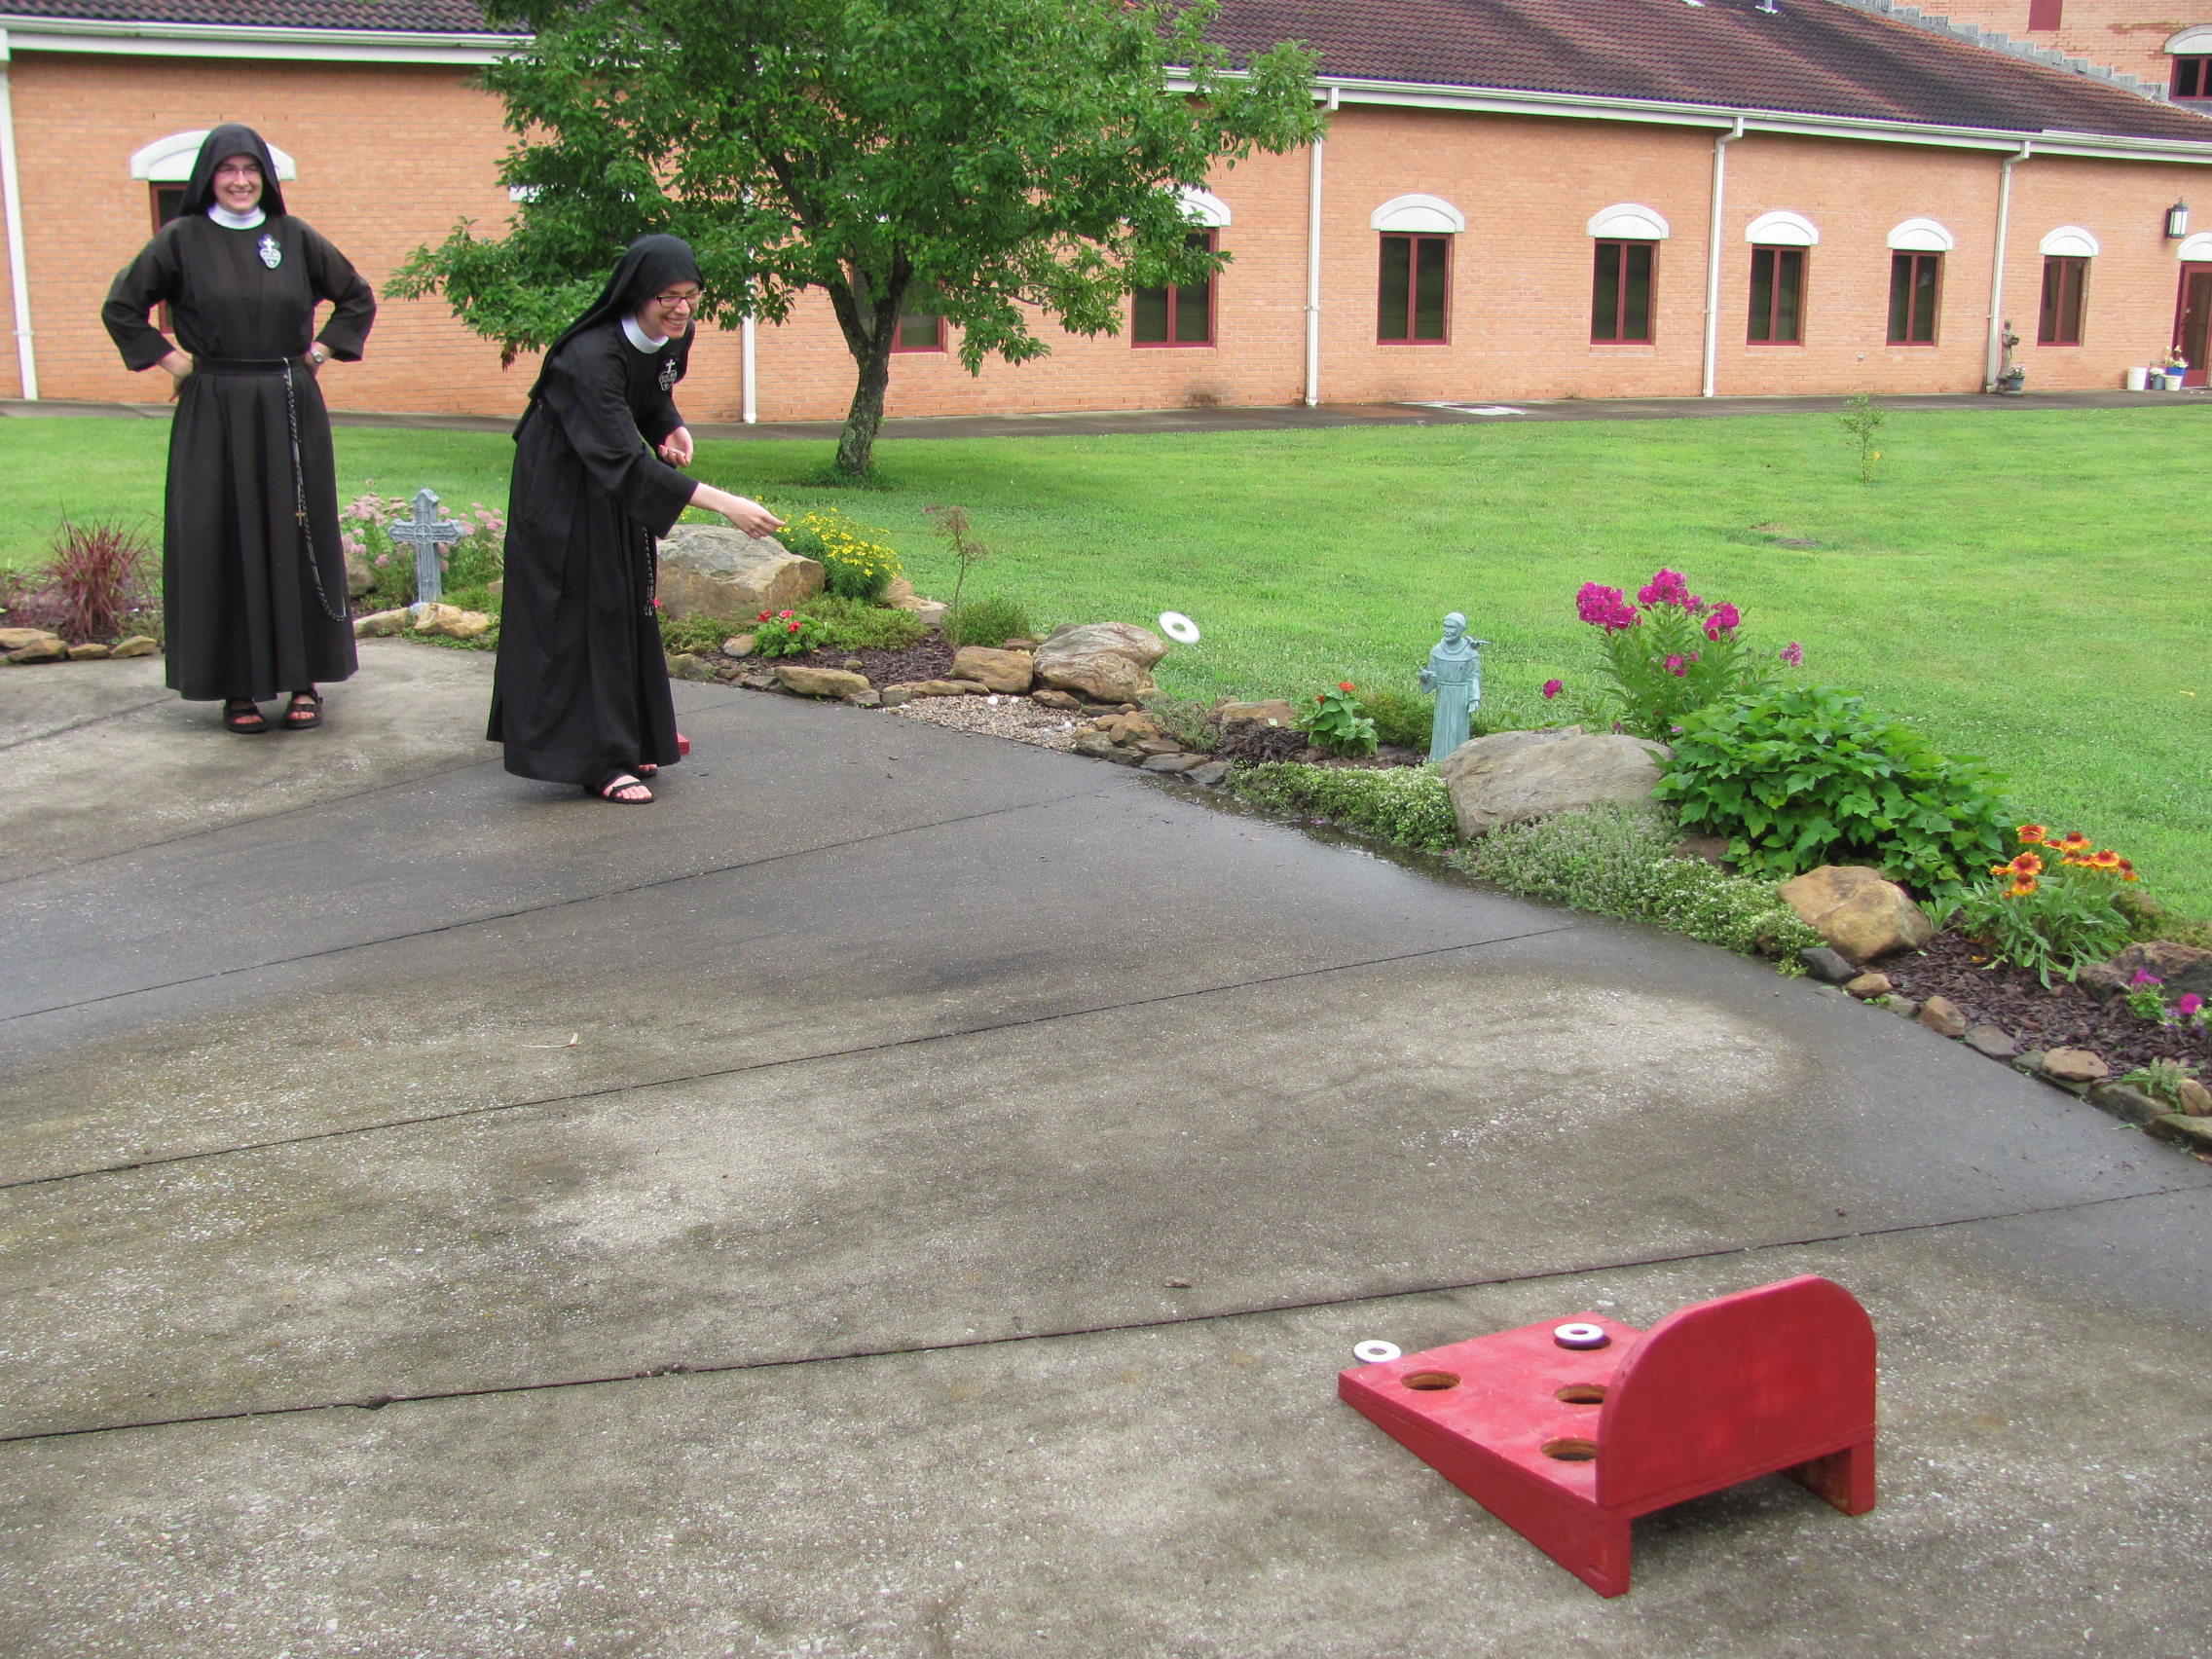  A rousing game of washers ensued.  Here’s Sr. Maria Faustina showing off her throws. 